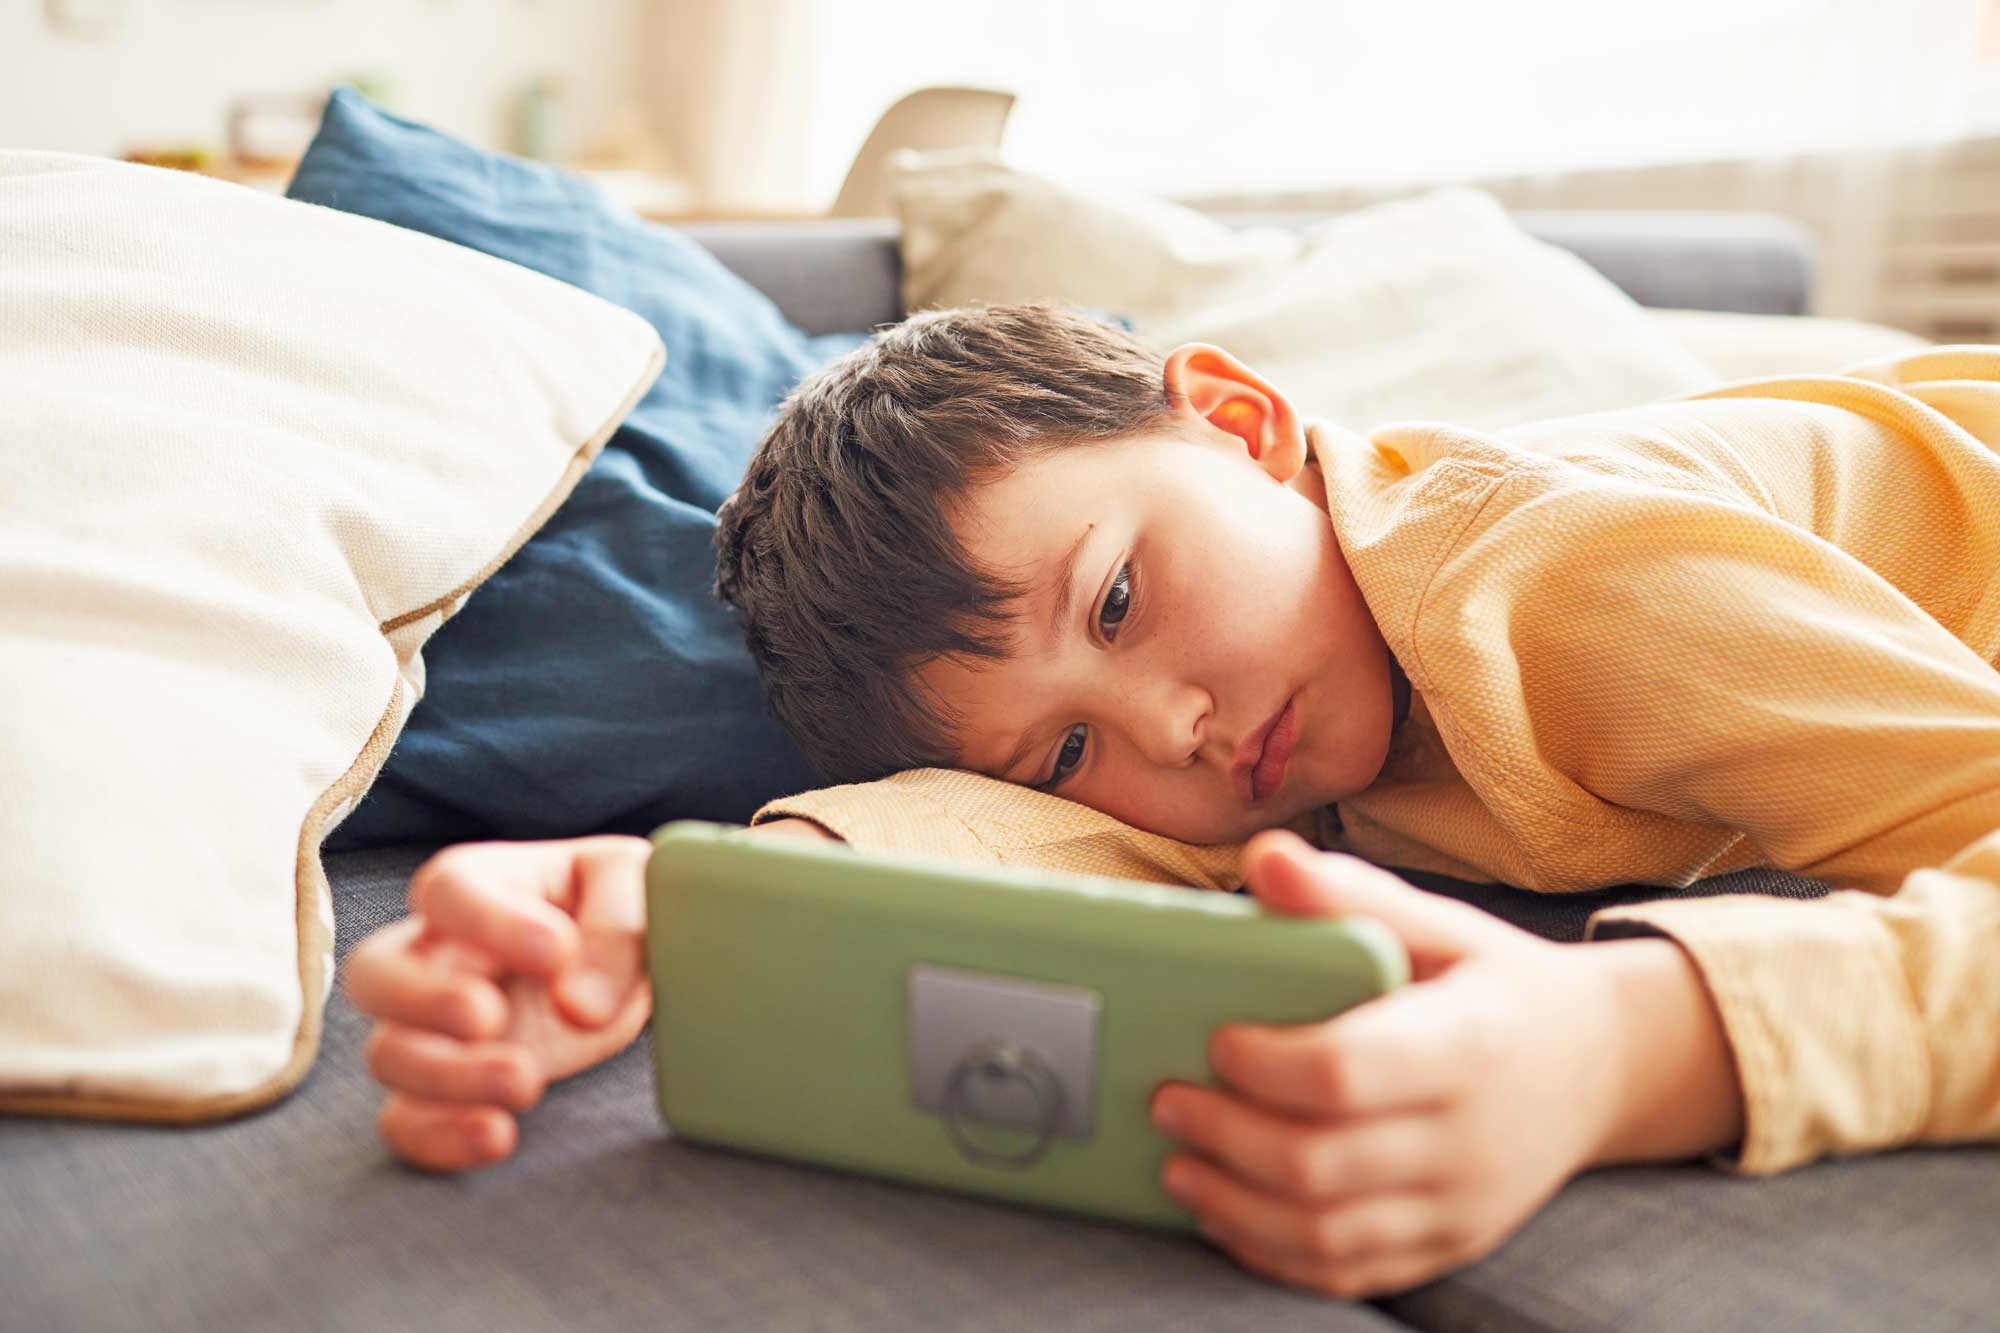 A Parent's Guide to Beating Summer Boredom